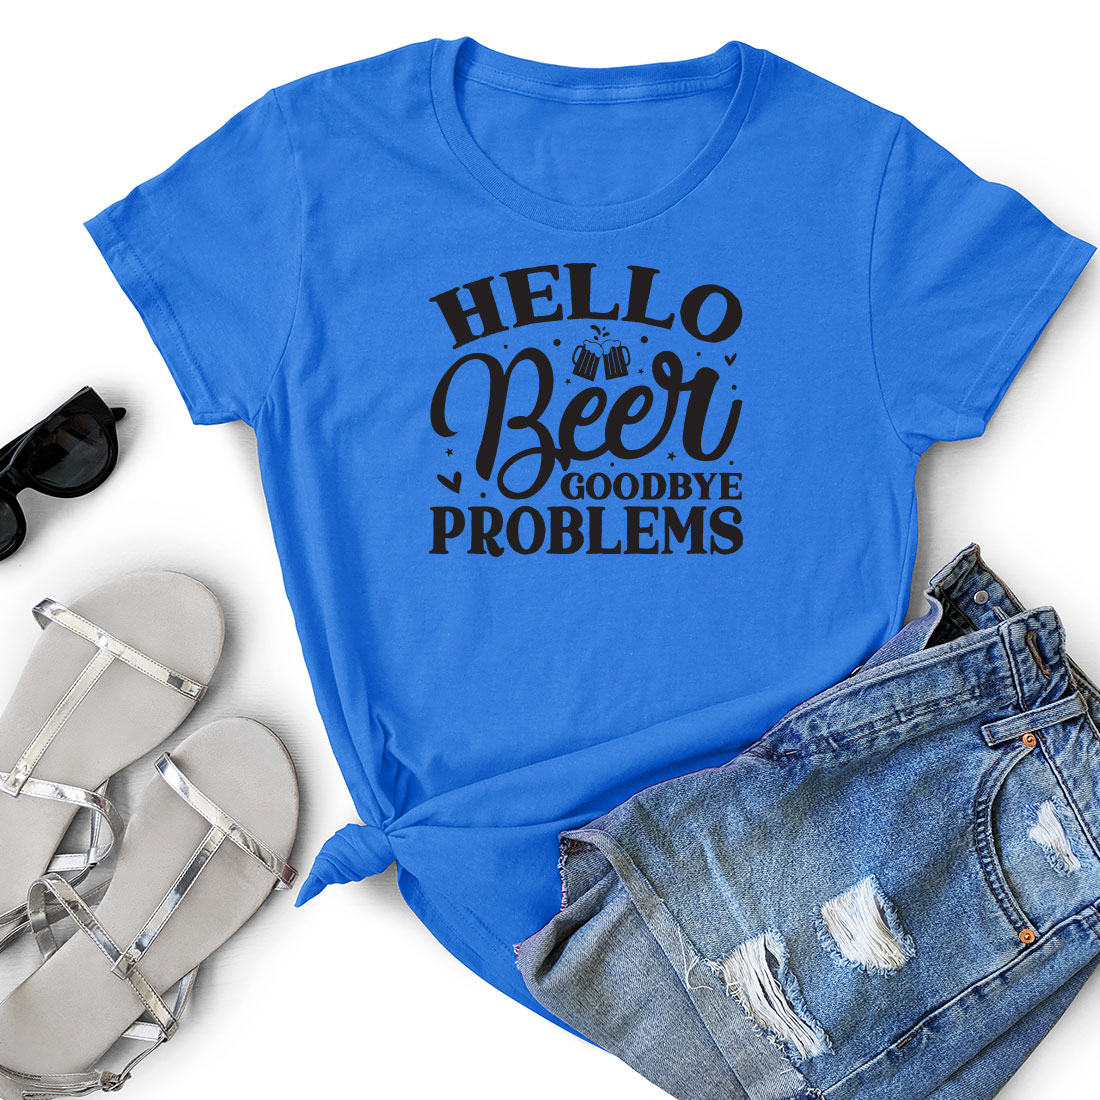 T - shirt that says hello beer good bye problems.